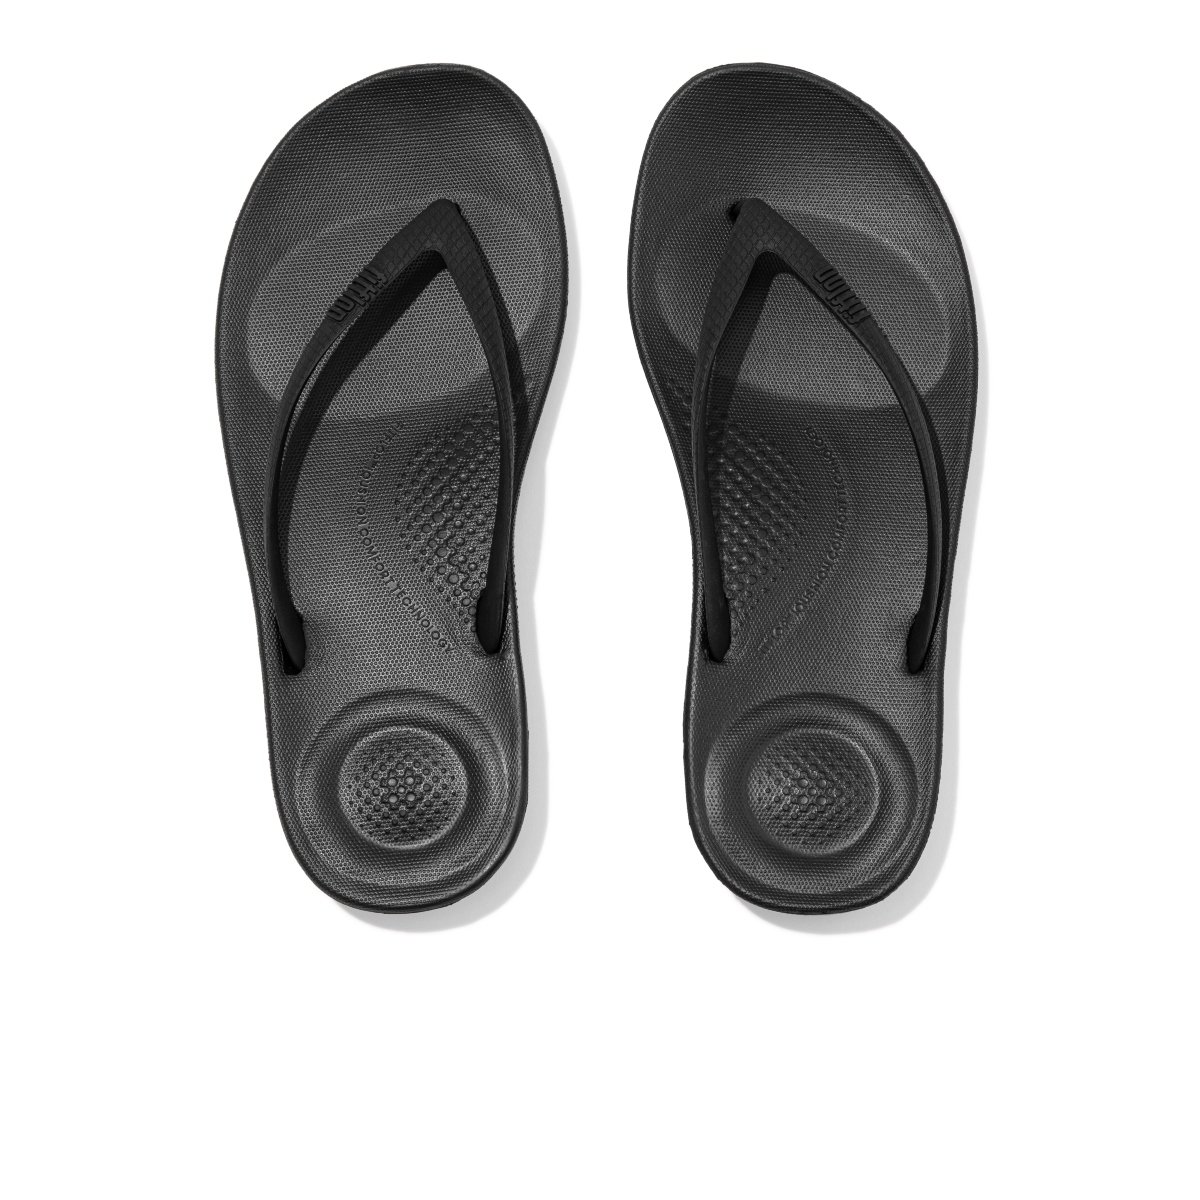 FitFlop iQUSHION Ergonomic Flip-Flops All Black top view